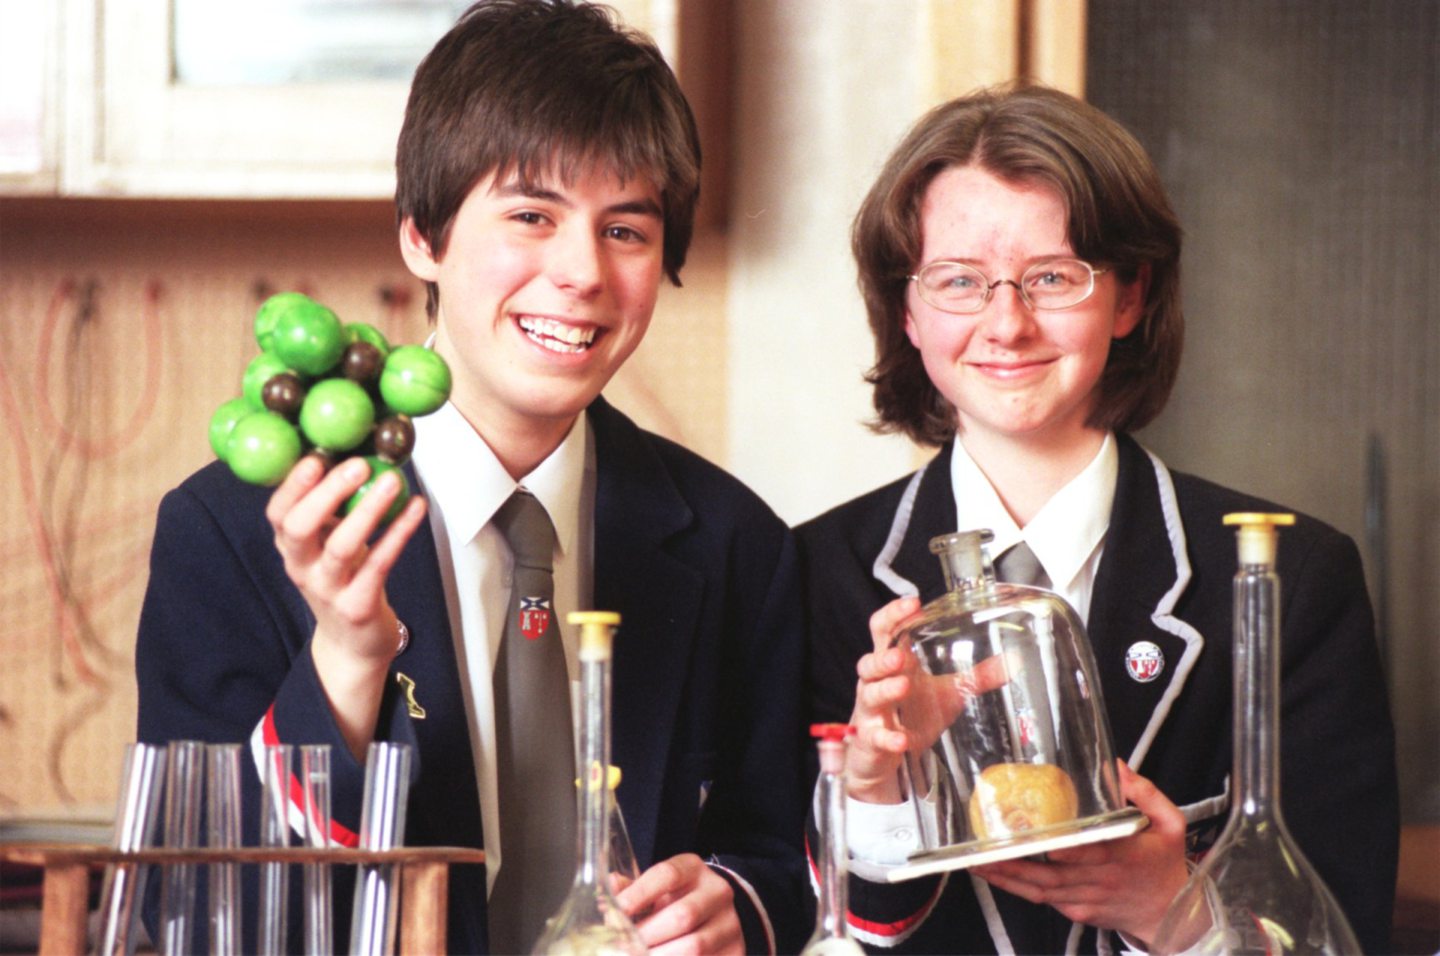 Grammar School pupils Rebecca Gane, and Judith Nieman who were to attend the British Youth Science Fair in London